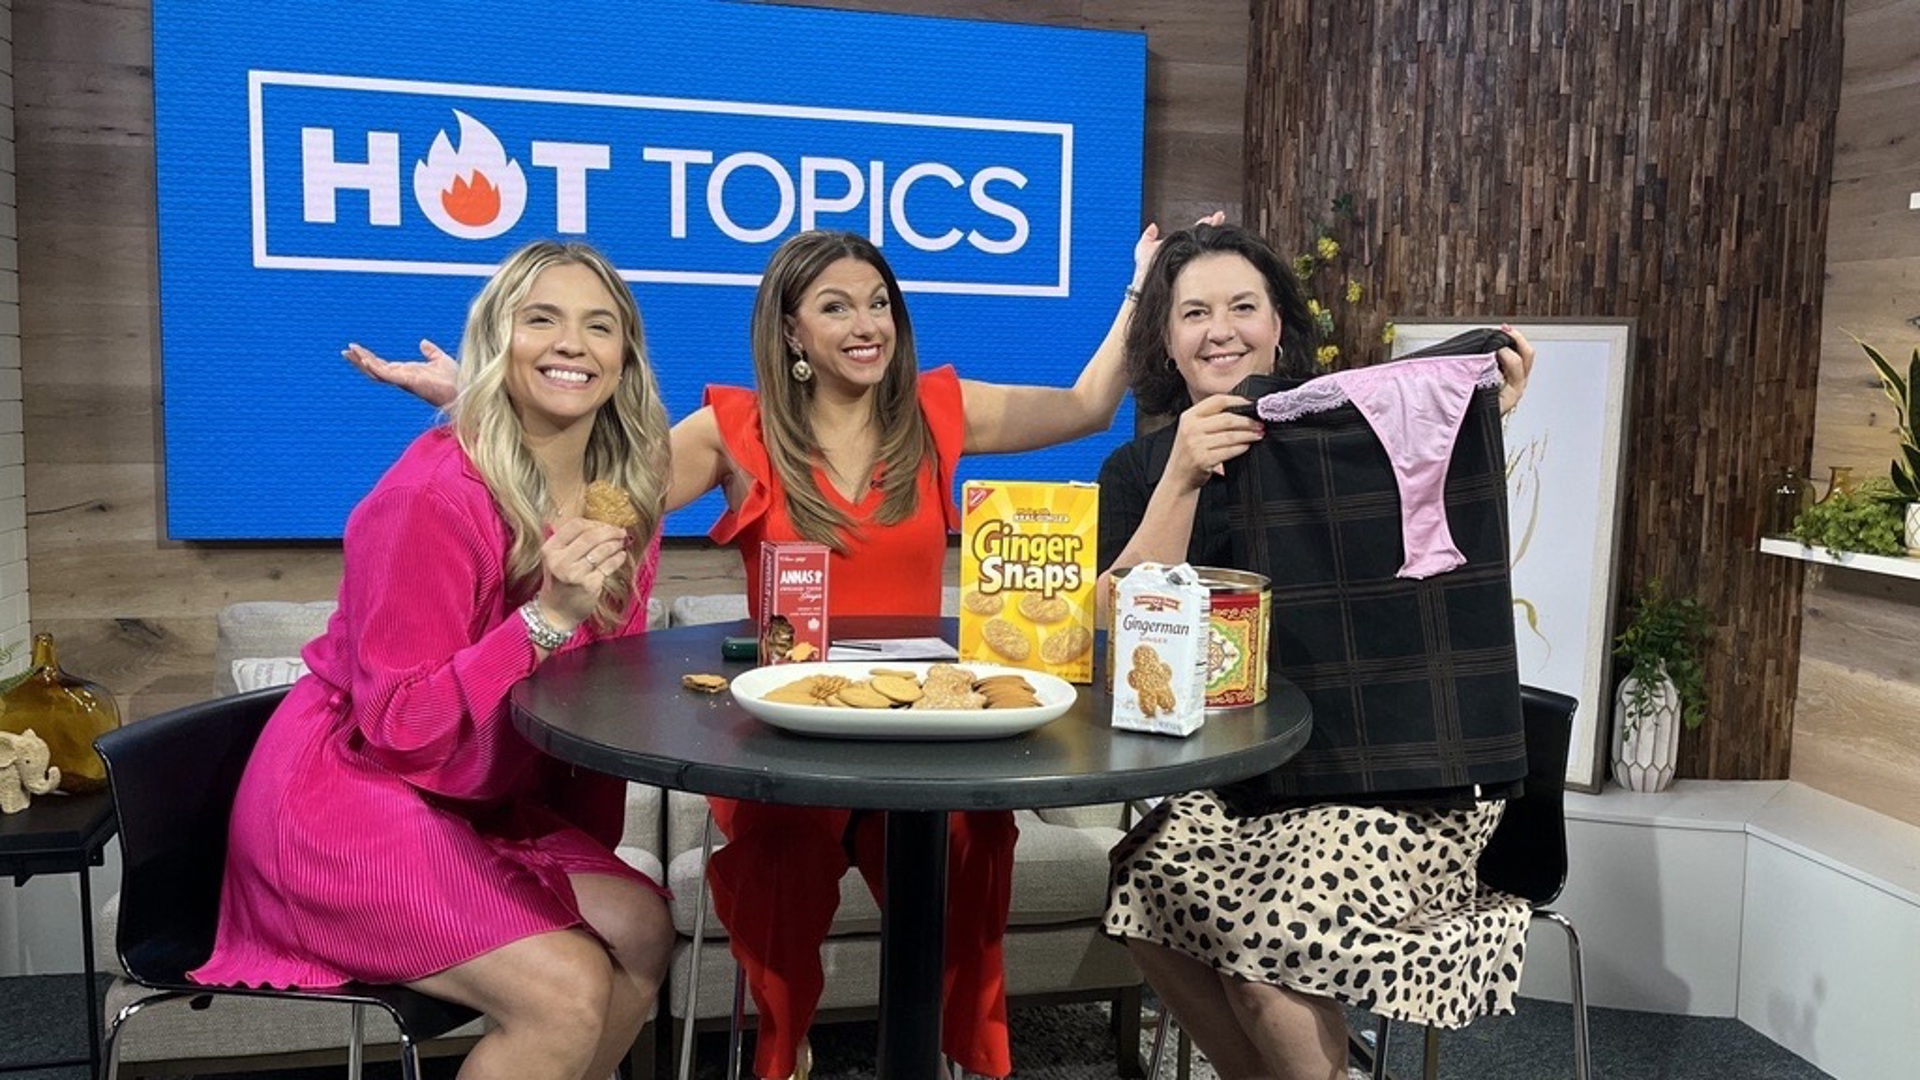 Amity chats with Carla Marie from "The Morning Show Podcast" and Producer Suzie Wiley about 4th of July plans, a skirt from Nordstrom going viral and more! #newdaynw